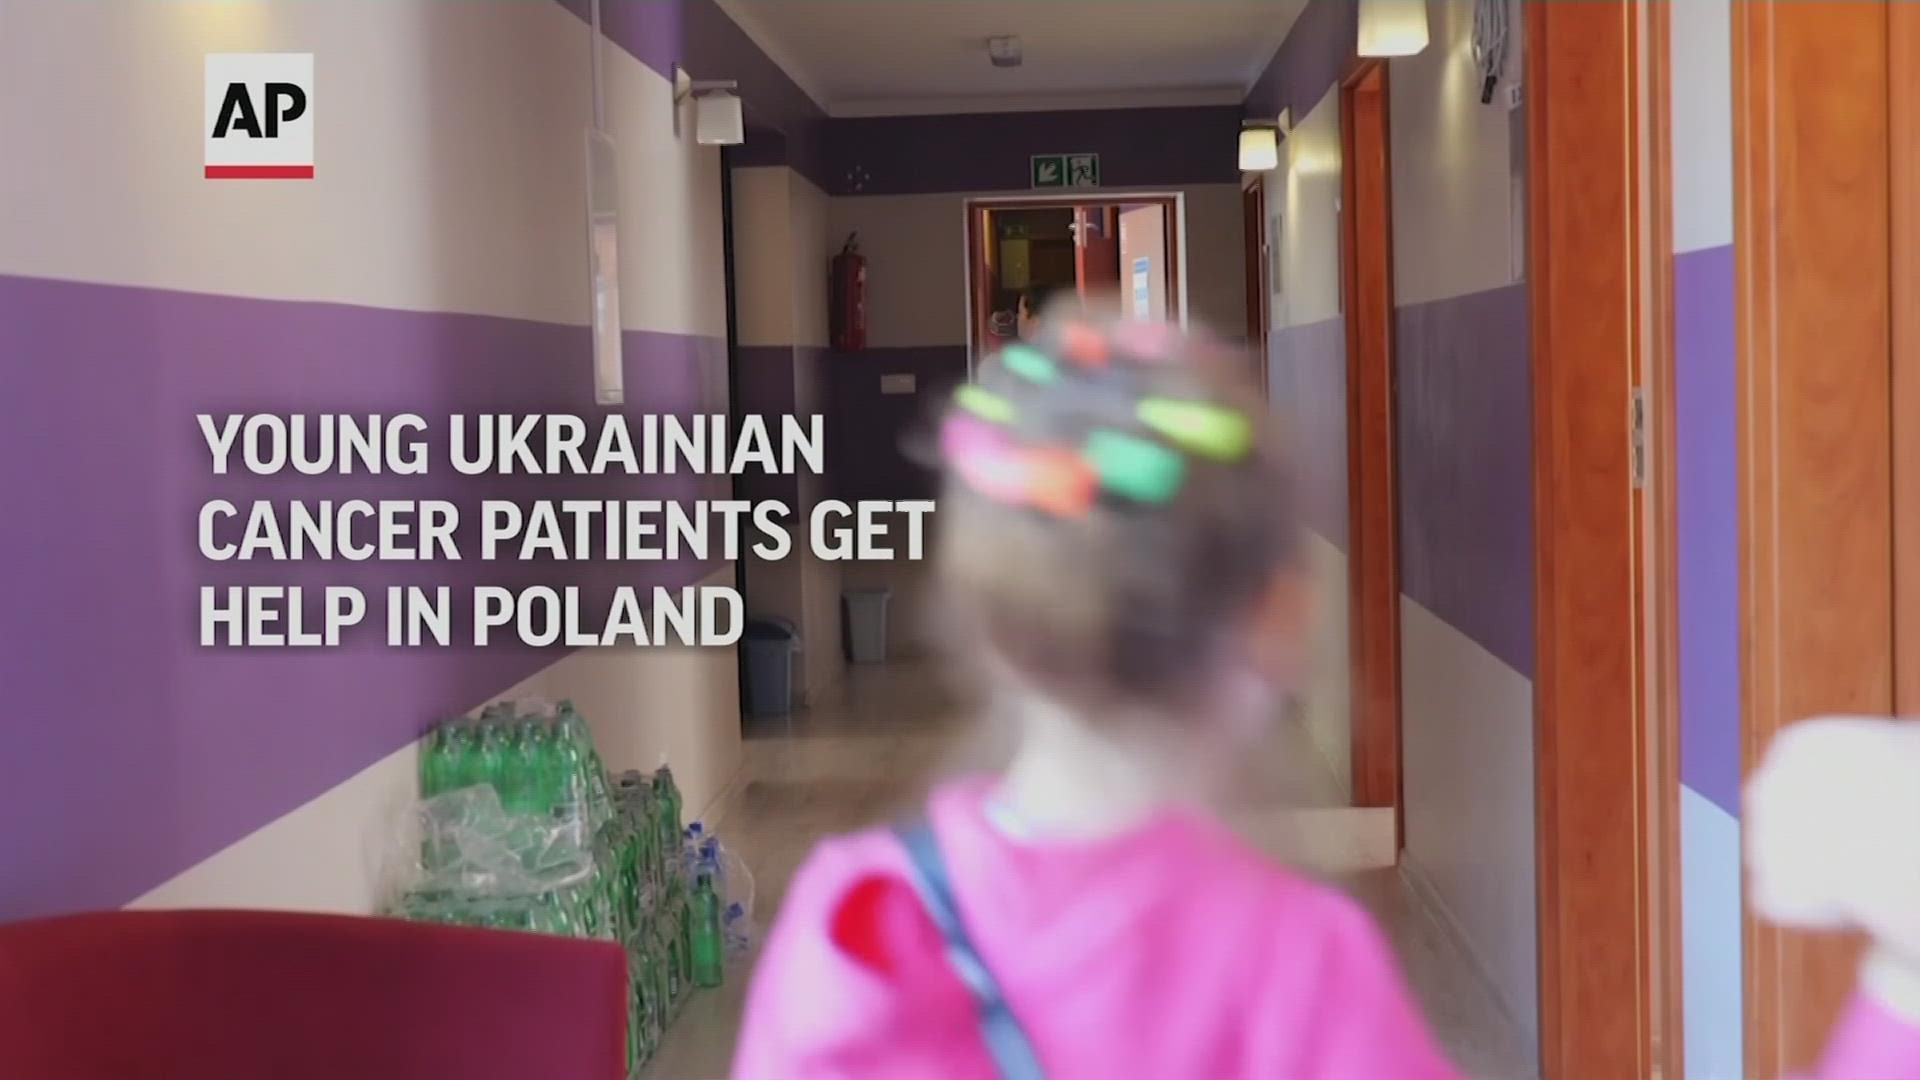 A Polish foundation and an American hospital have teamed up to help children with cancer and blood diseases who have fled the war in Ukraine.